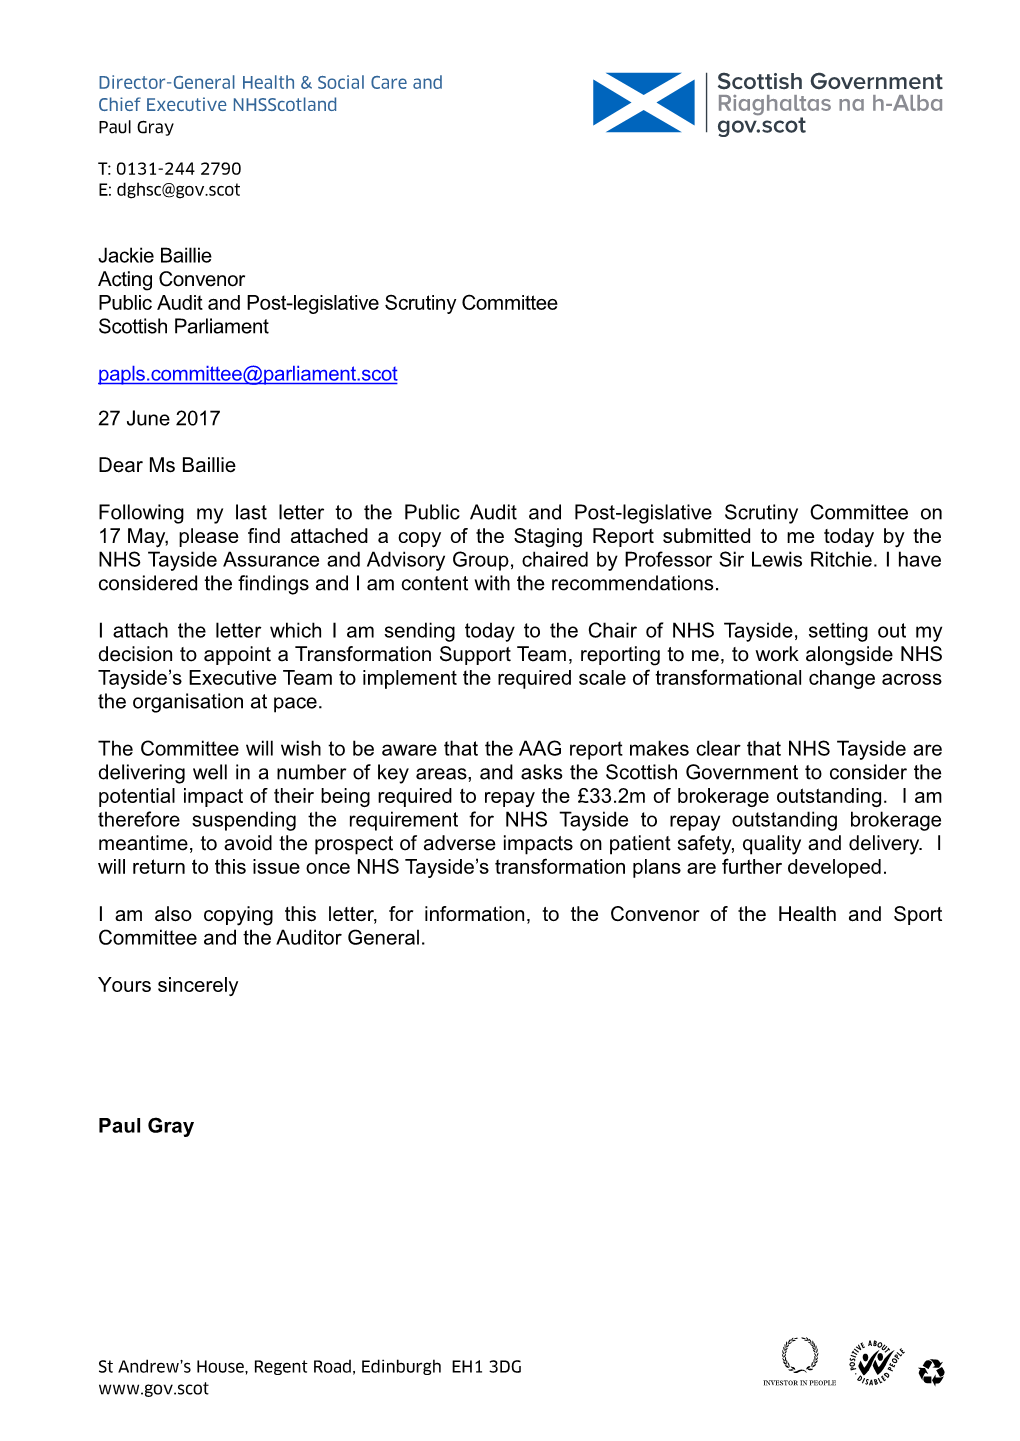 S Letter, for Information, to the Convenor of the Health and Sport Committee and the Auditor General